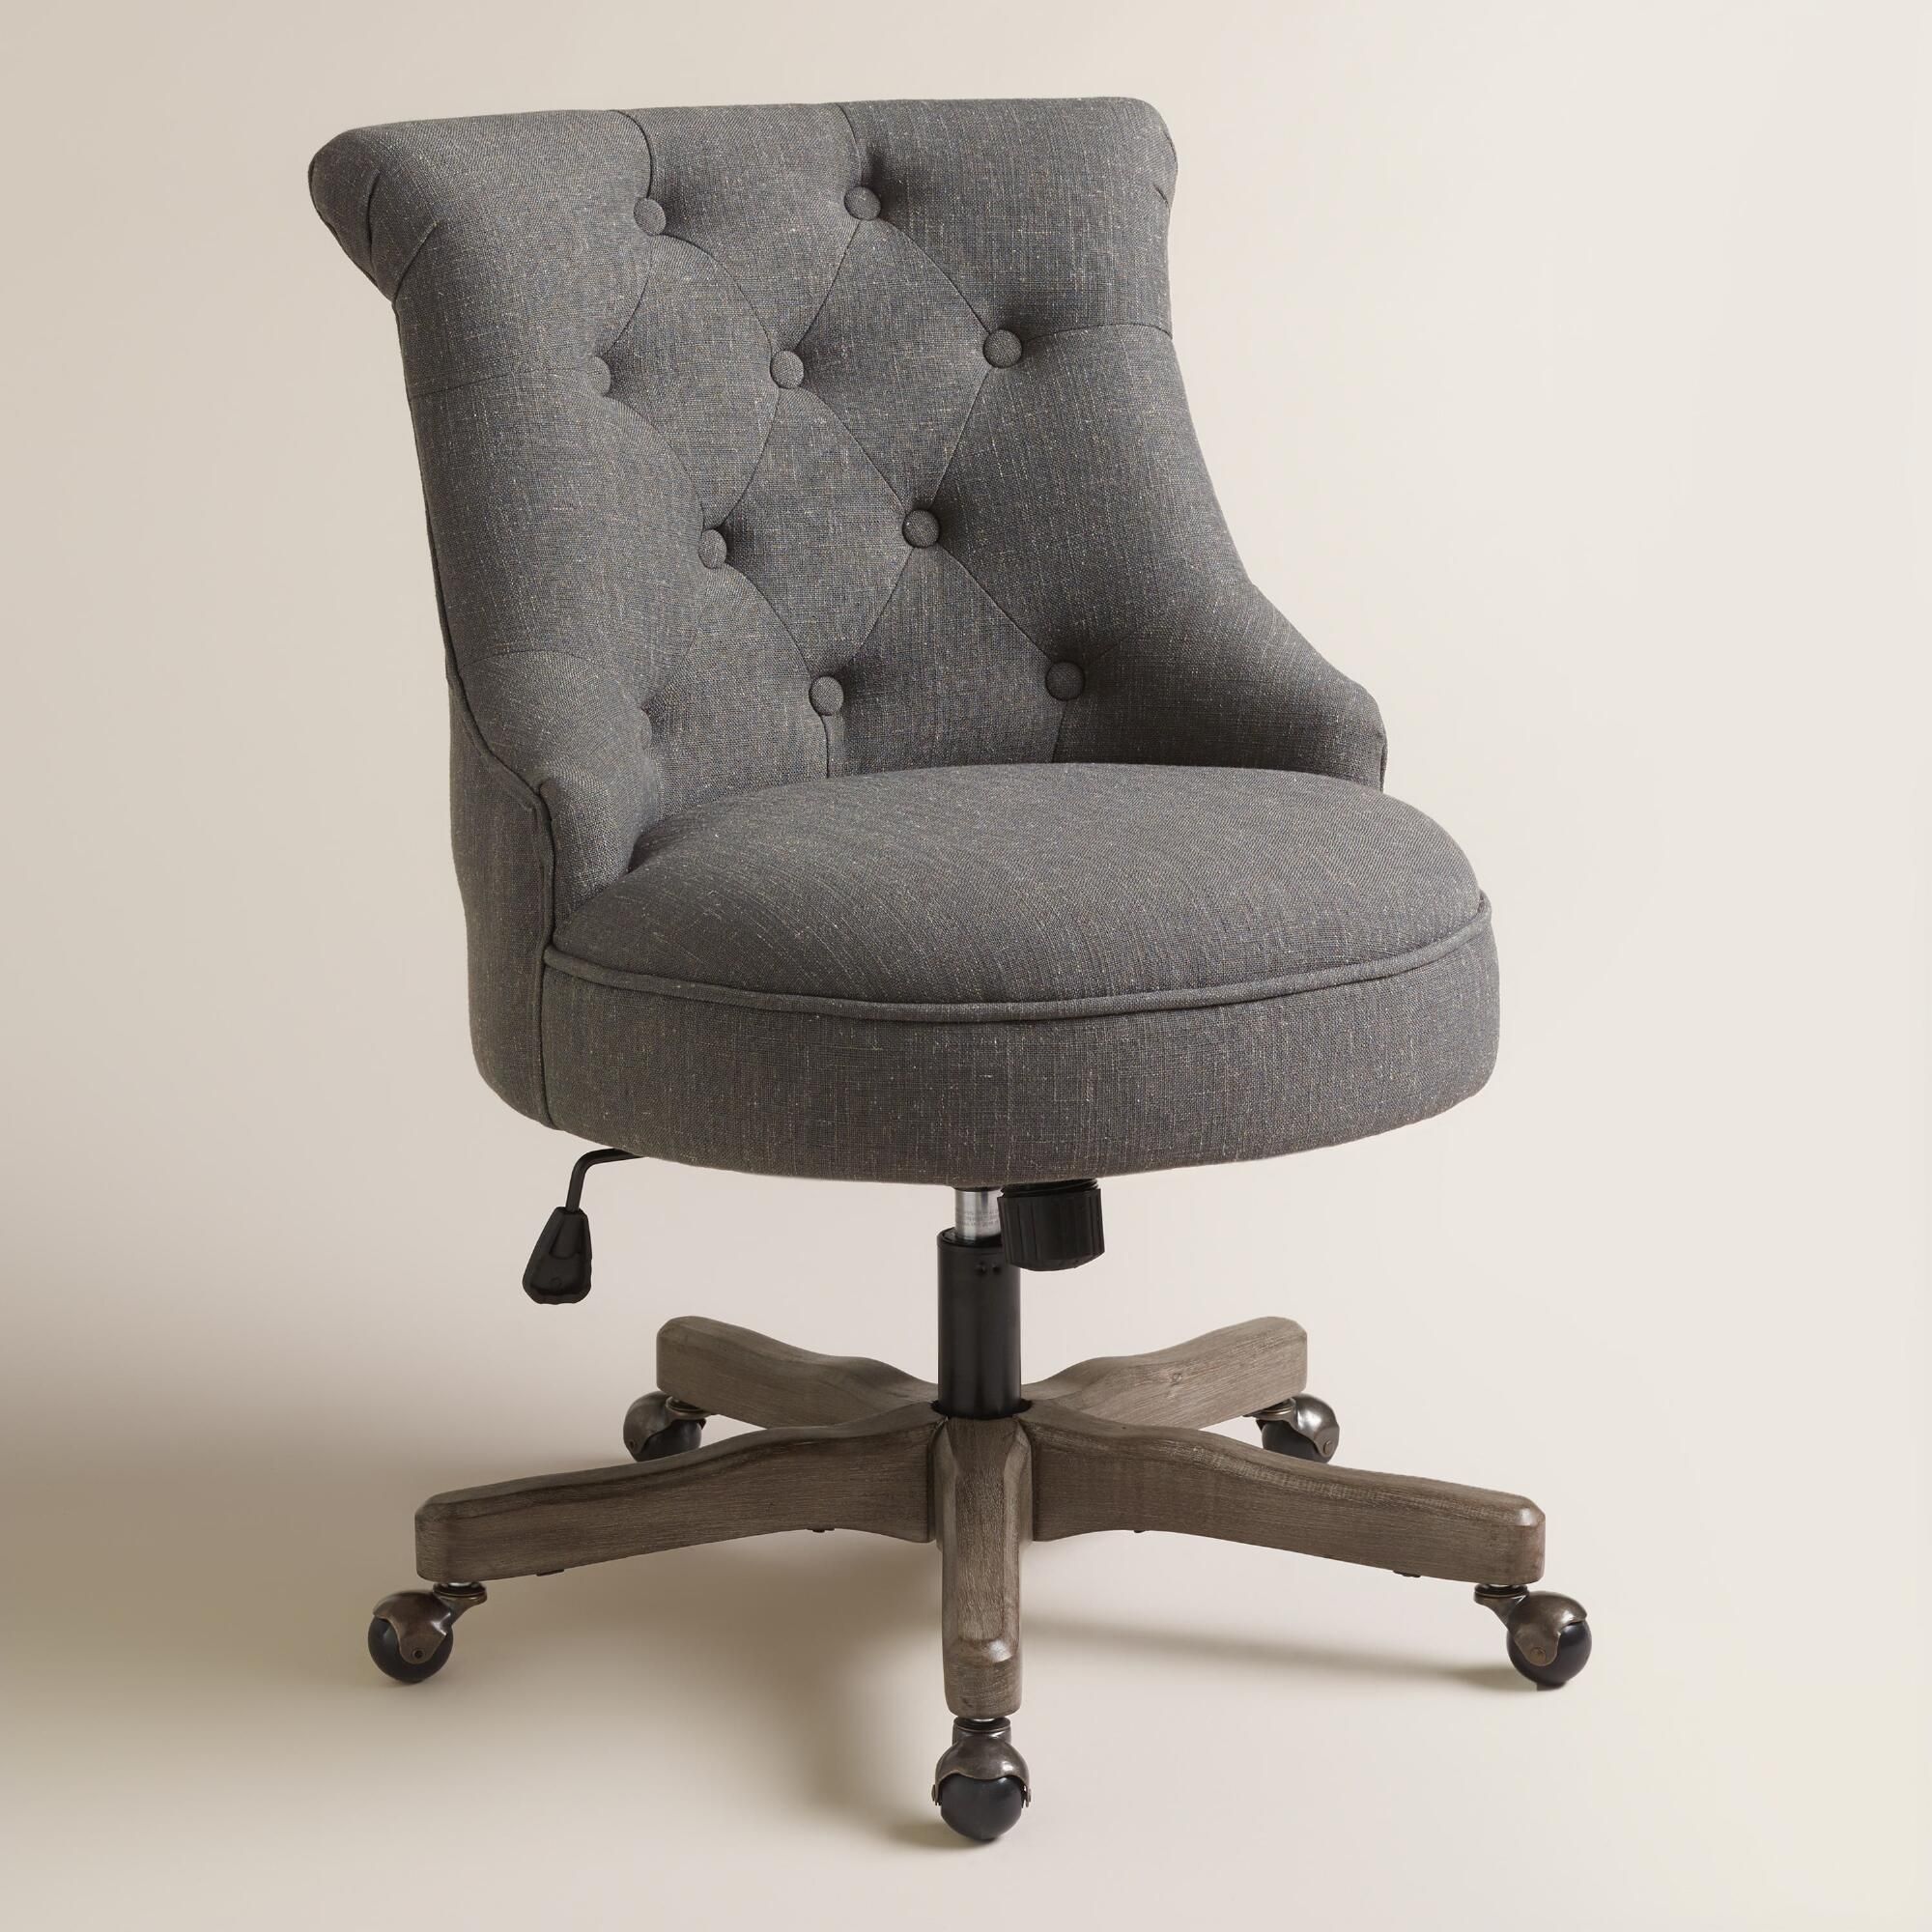 Furniture Arhaus Chairs For Inspiring Upholstered Chair Design Throughout Sofa Desk Chairs (View 5 of 15)